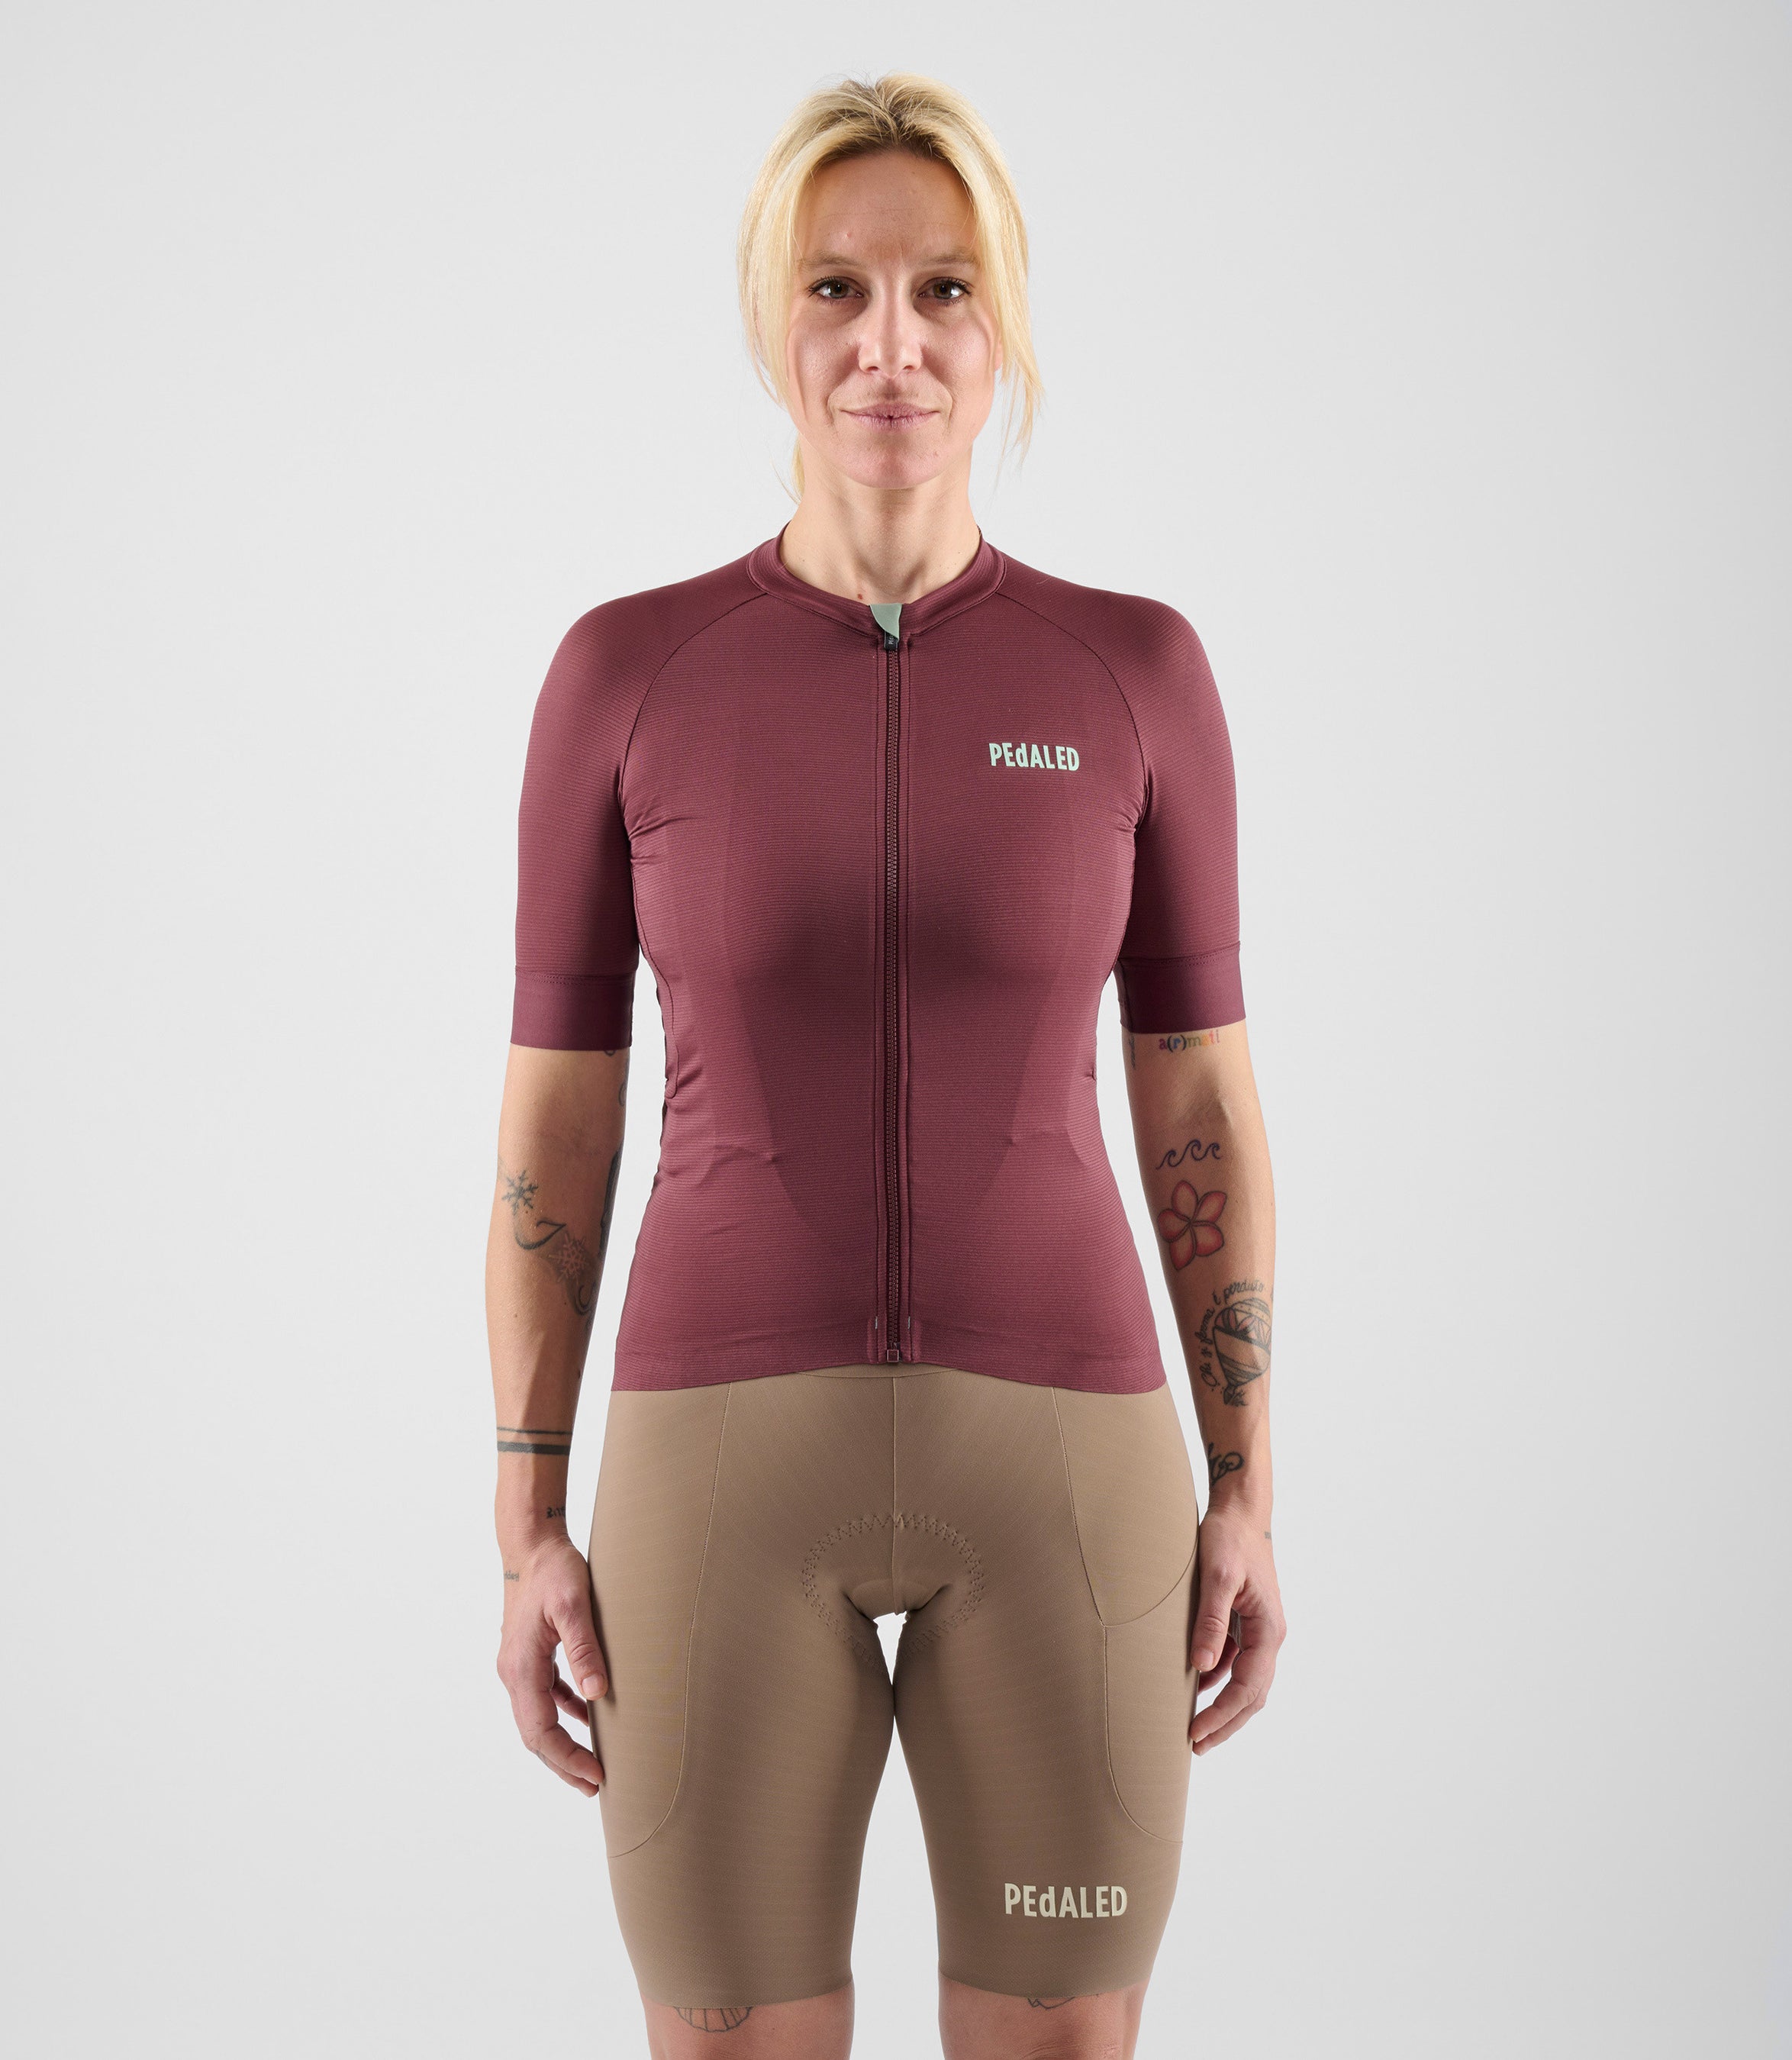 W4SLJEL26PE_3_women cycling lightweight jersey element dark red total body front pedaled